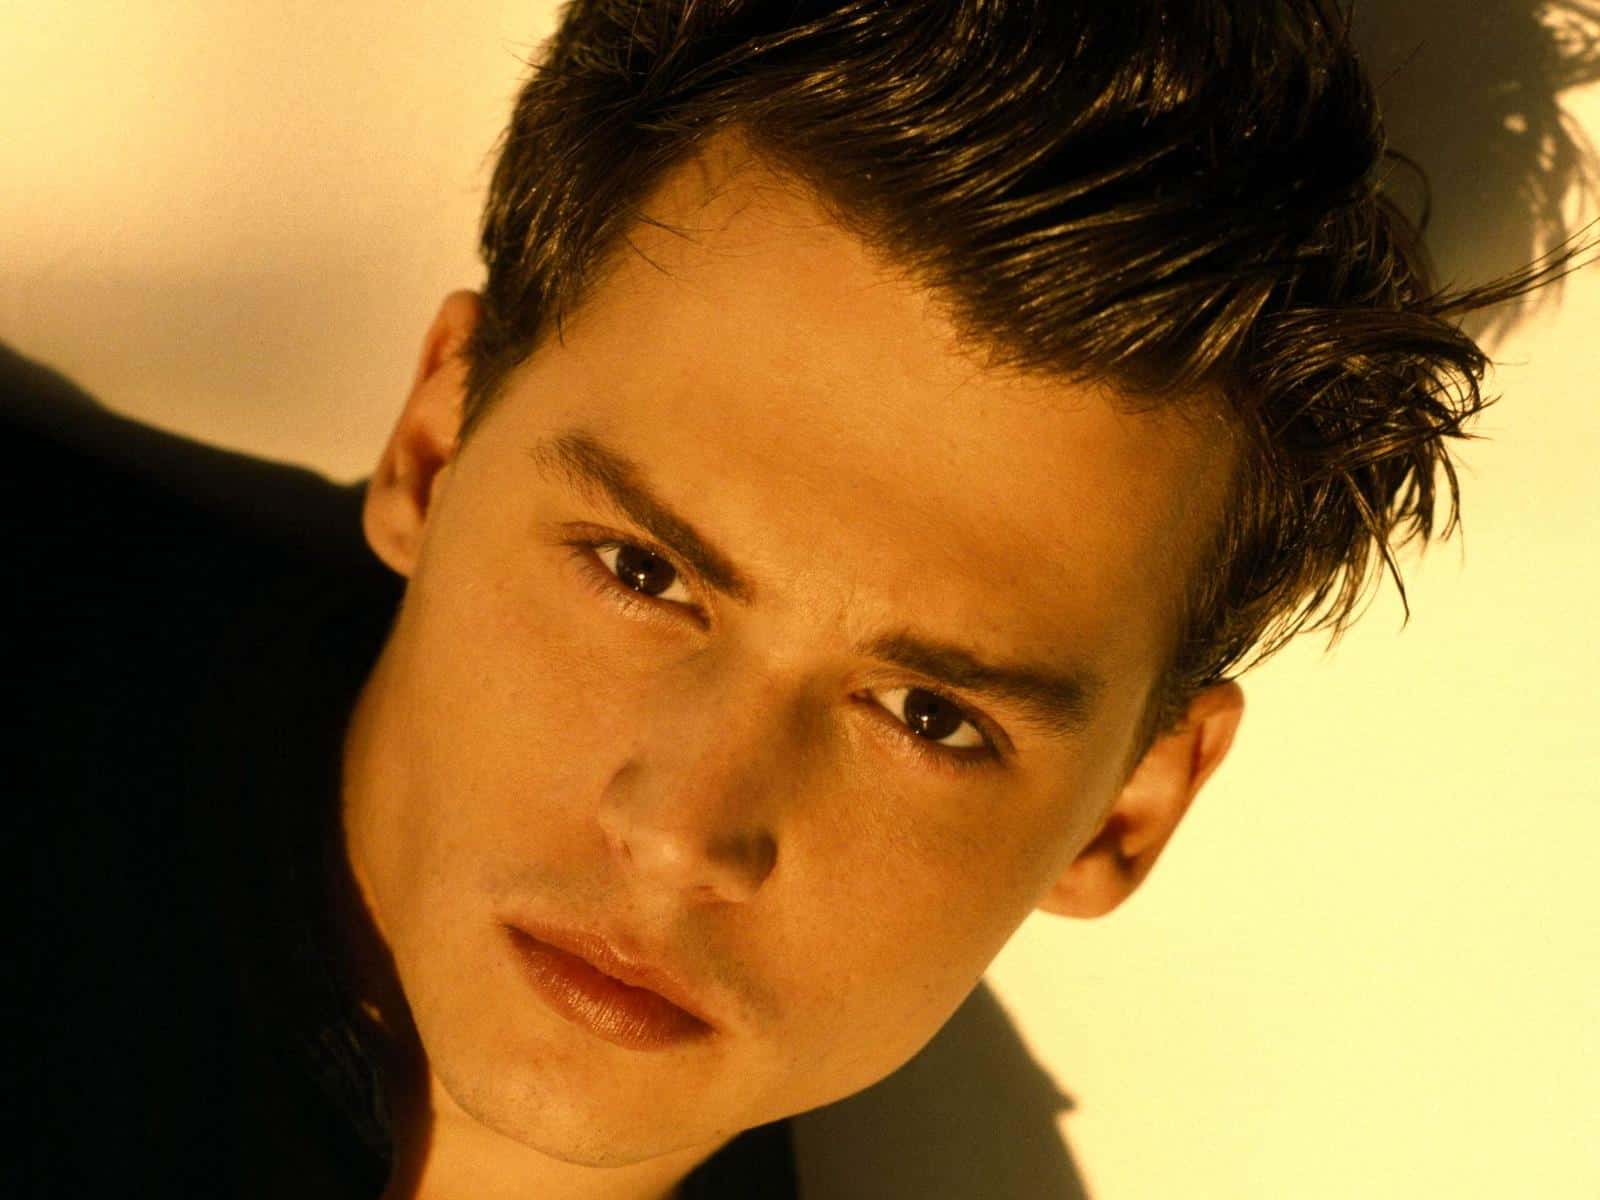 20+ Best 90s Hairstyles For Men to Try in 2023 - Back to the Future